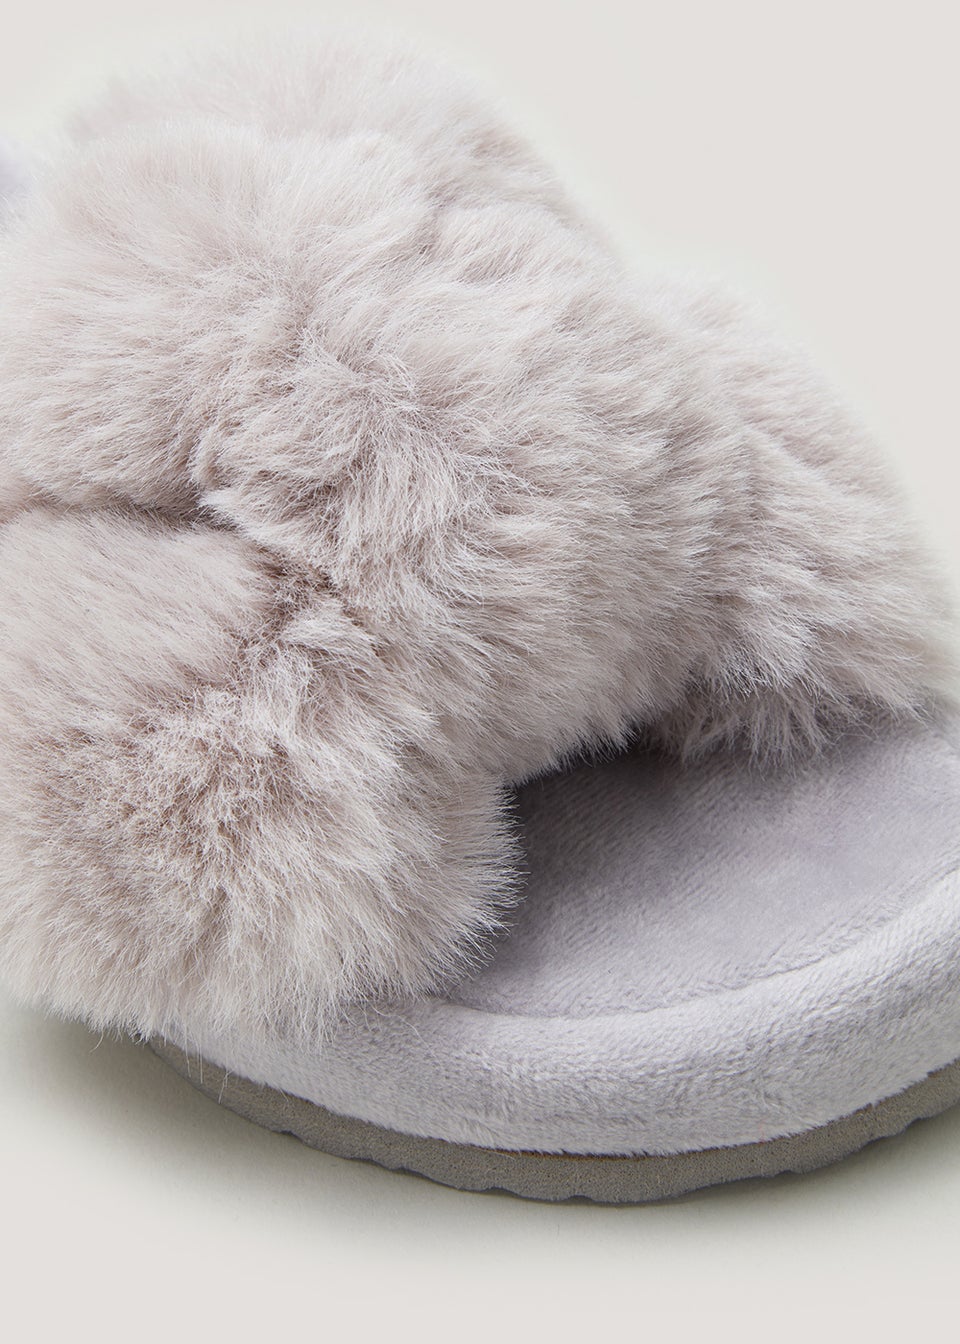 Grey Faux Fur Knot Footbed Slippers